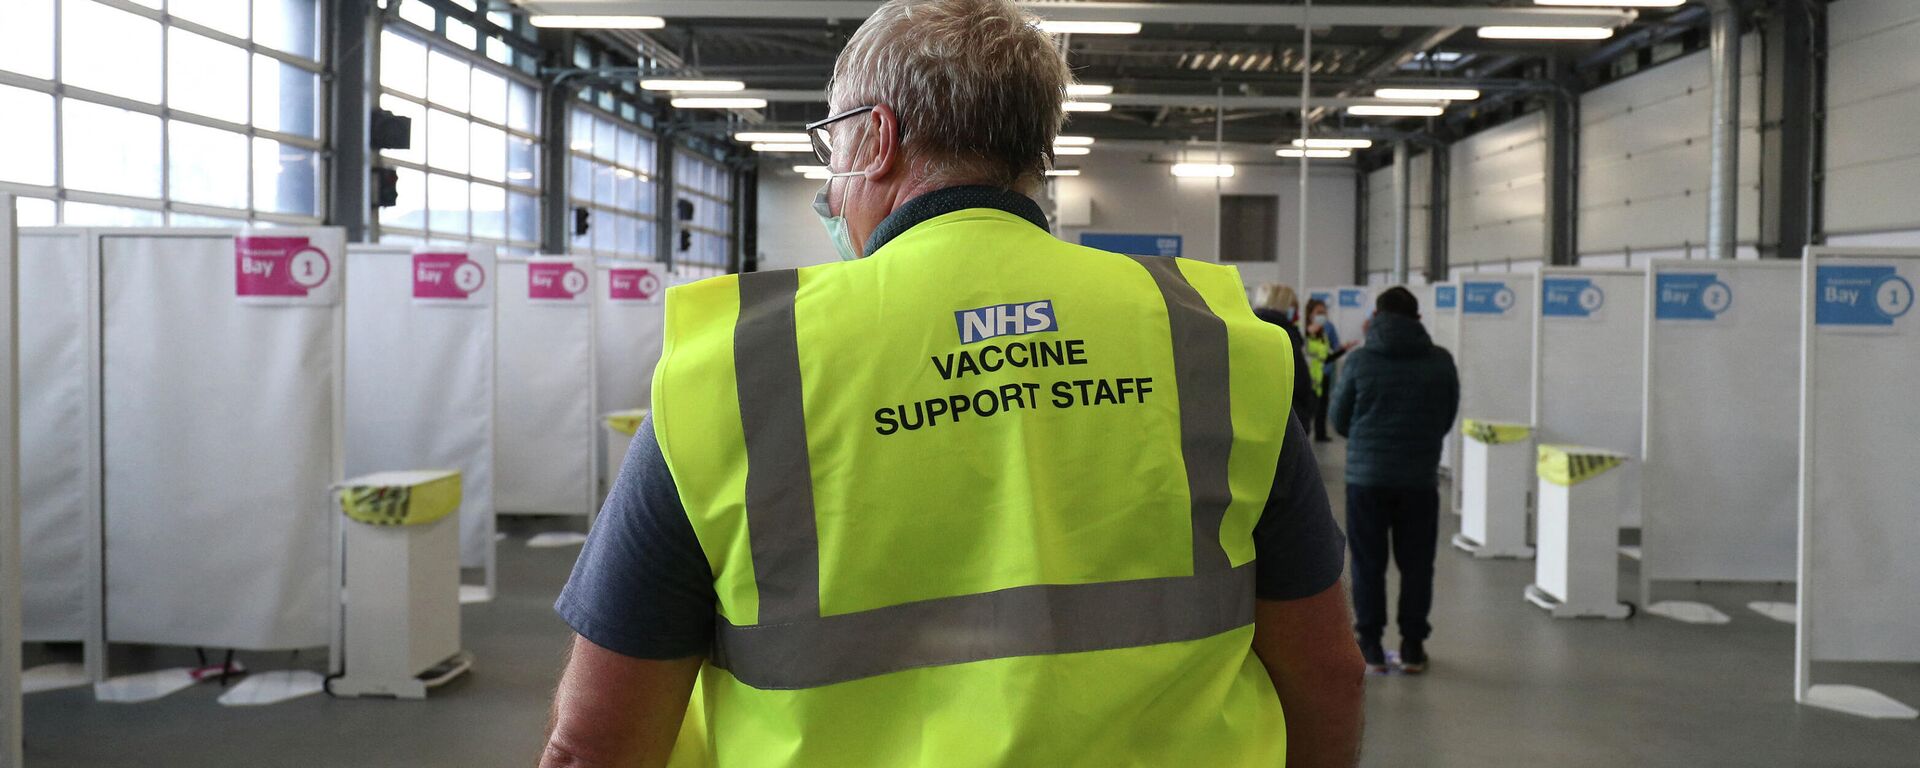 A member of the NHS vaccine support staff looks on as residents wait to receive the Oxford/AstraZeneca Covid-19 vaccine from a member of the Hampshire Fire and Rescue Service at a temporary vaccination centre set up at Basingstoke Fire Station, Hampshire, south England, as crews continue to take 999 emergency calls - Sputnik International, 1920, 20.10.2021